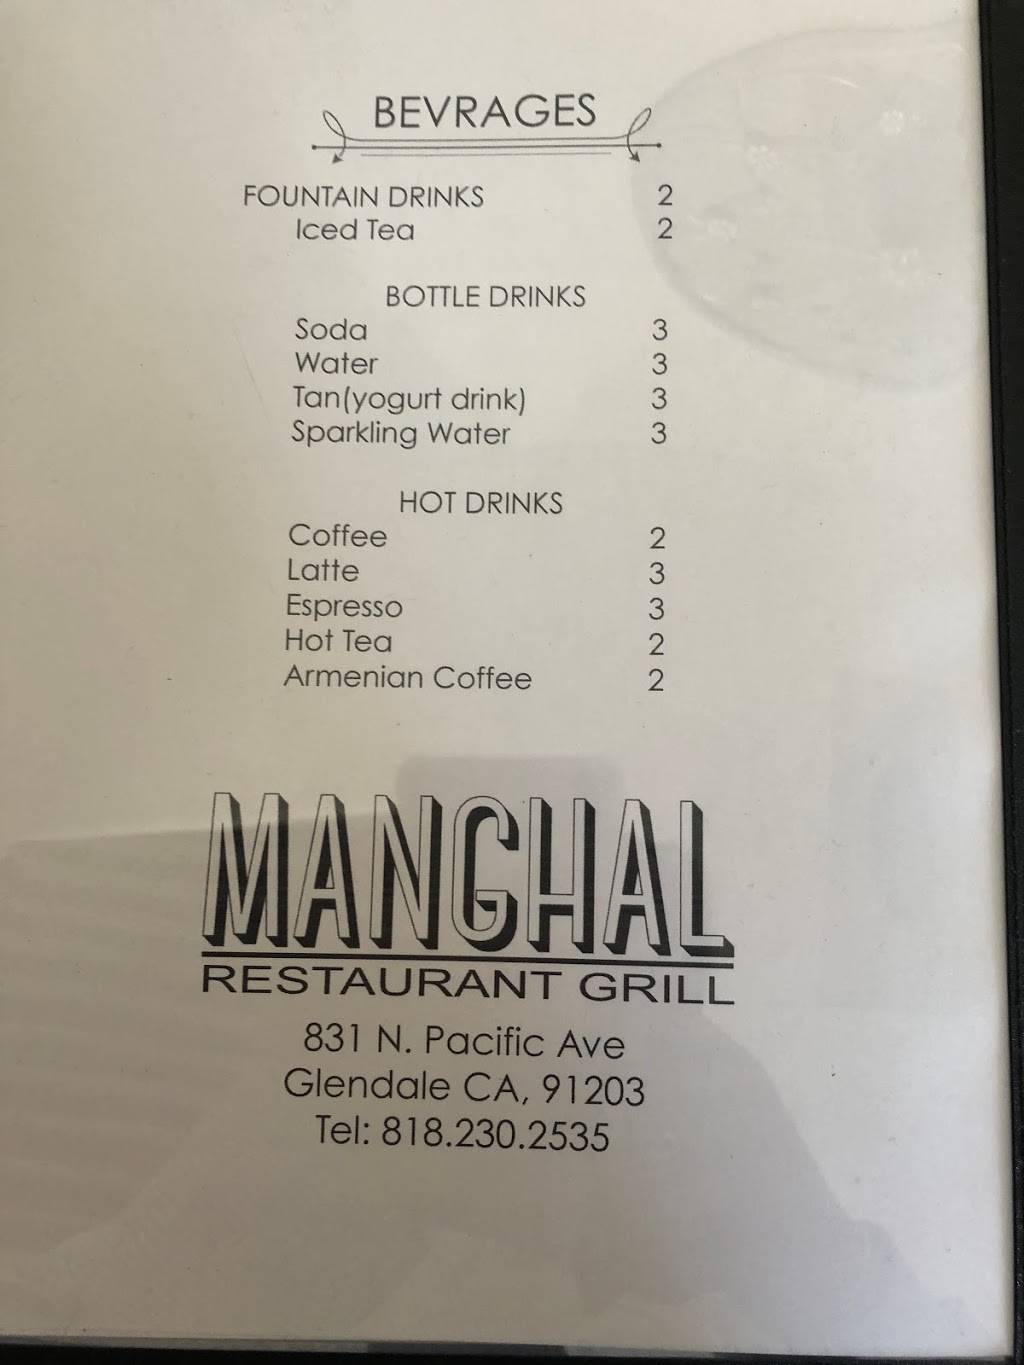 MANGHAL Restaurant Grill | restaurant | 831 N Pacific Ave, Glendale, CA 91203, USA | 8182302535 OR +1 818-230-2535